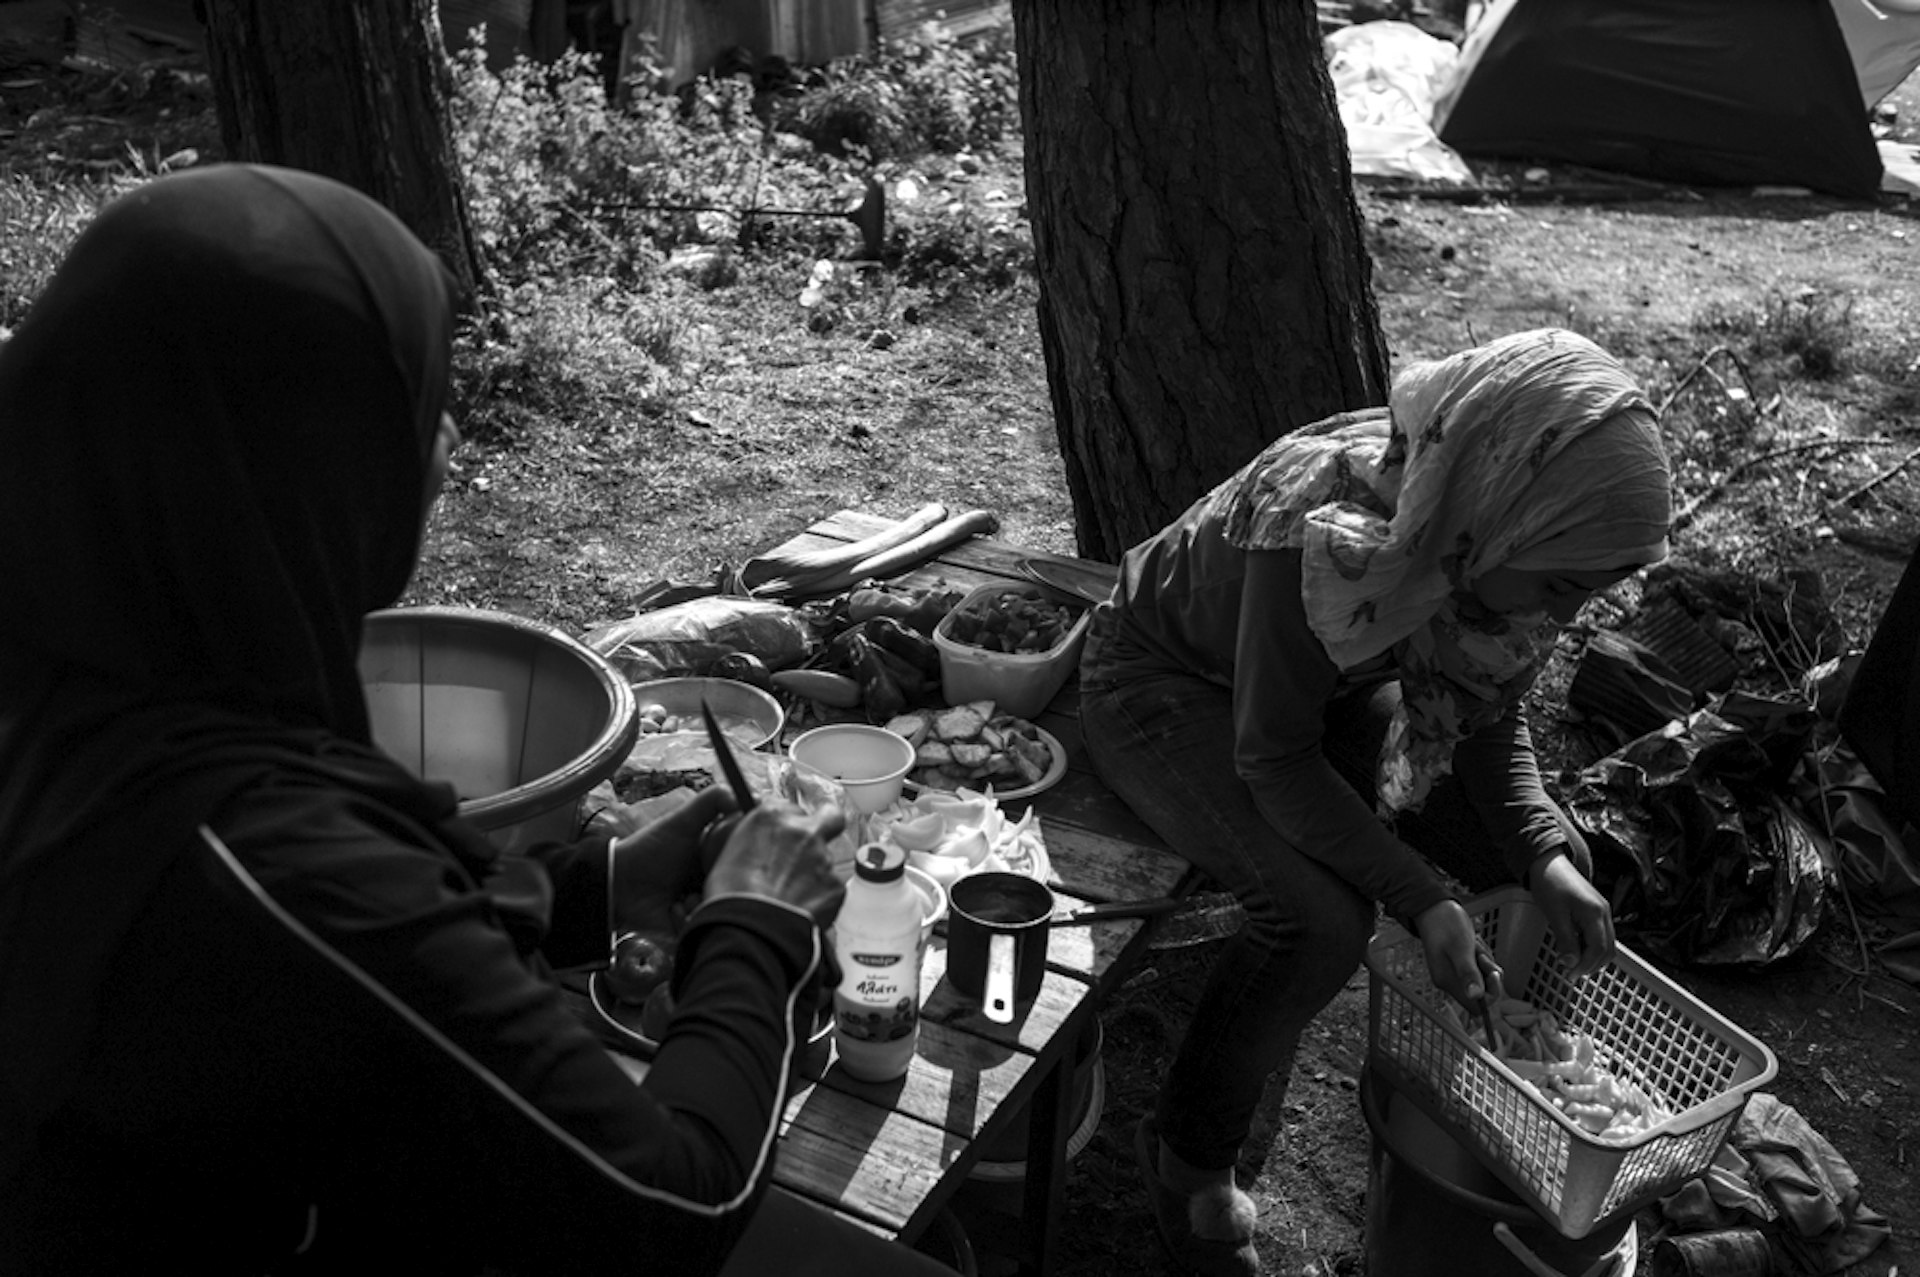 Amira (left) and Shayma (right) peeling potatoes in their campsite above the road leading to the Macedonian border. They have been living in the camp for two months after fleeing Raqqa in Syria.